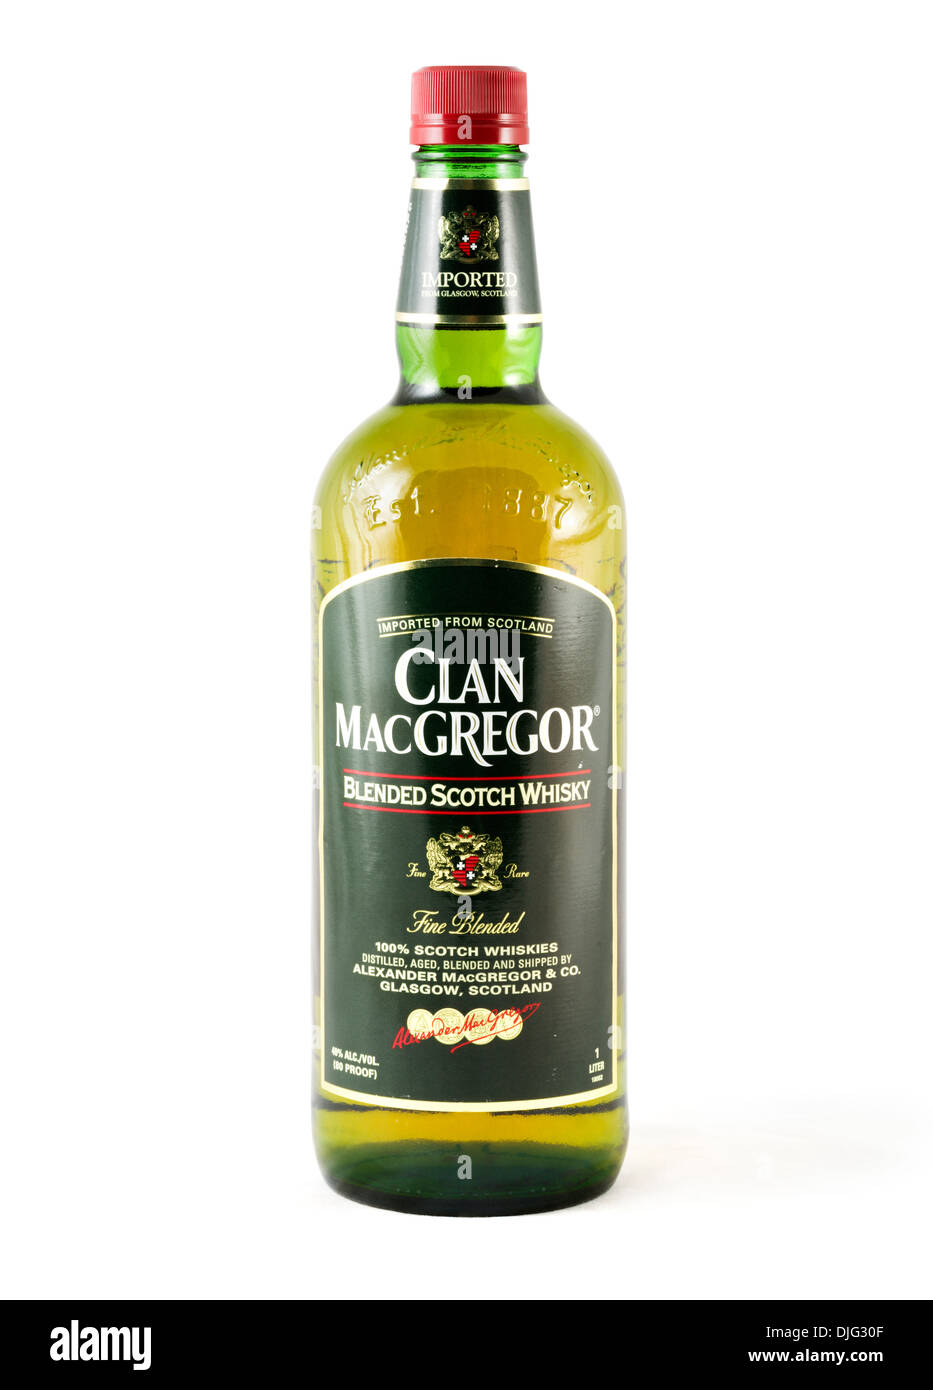 Flasche Clan MacGregor importiert blended Scotch Whisky, USA Stockfoto